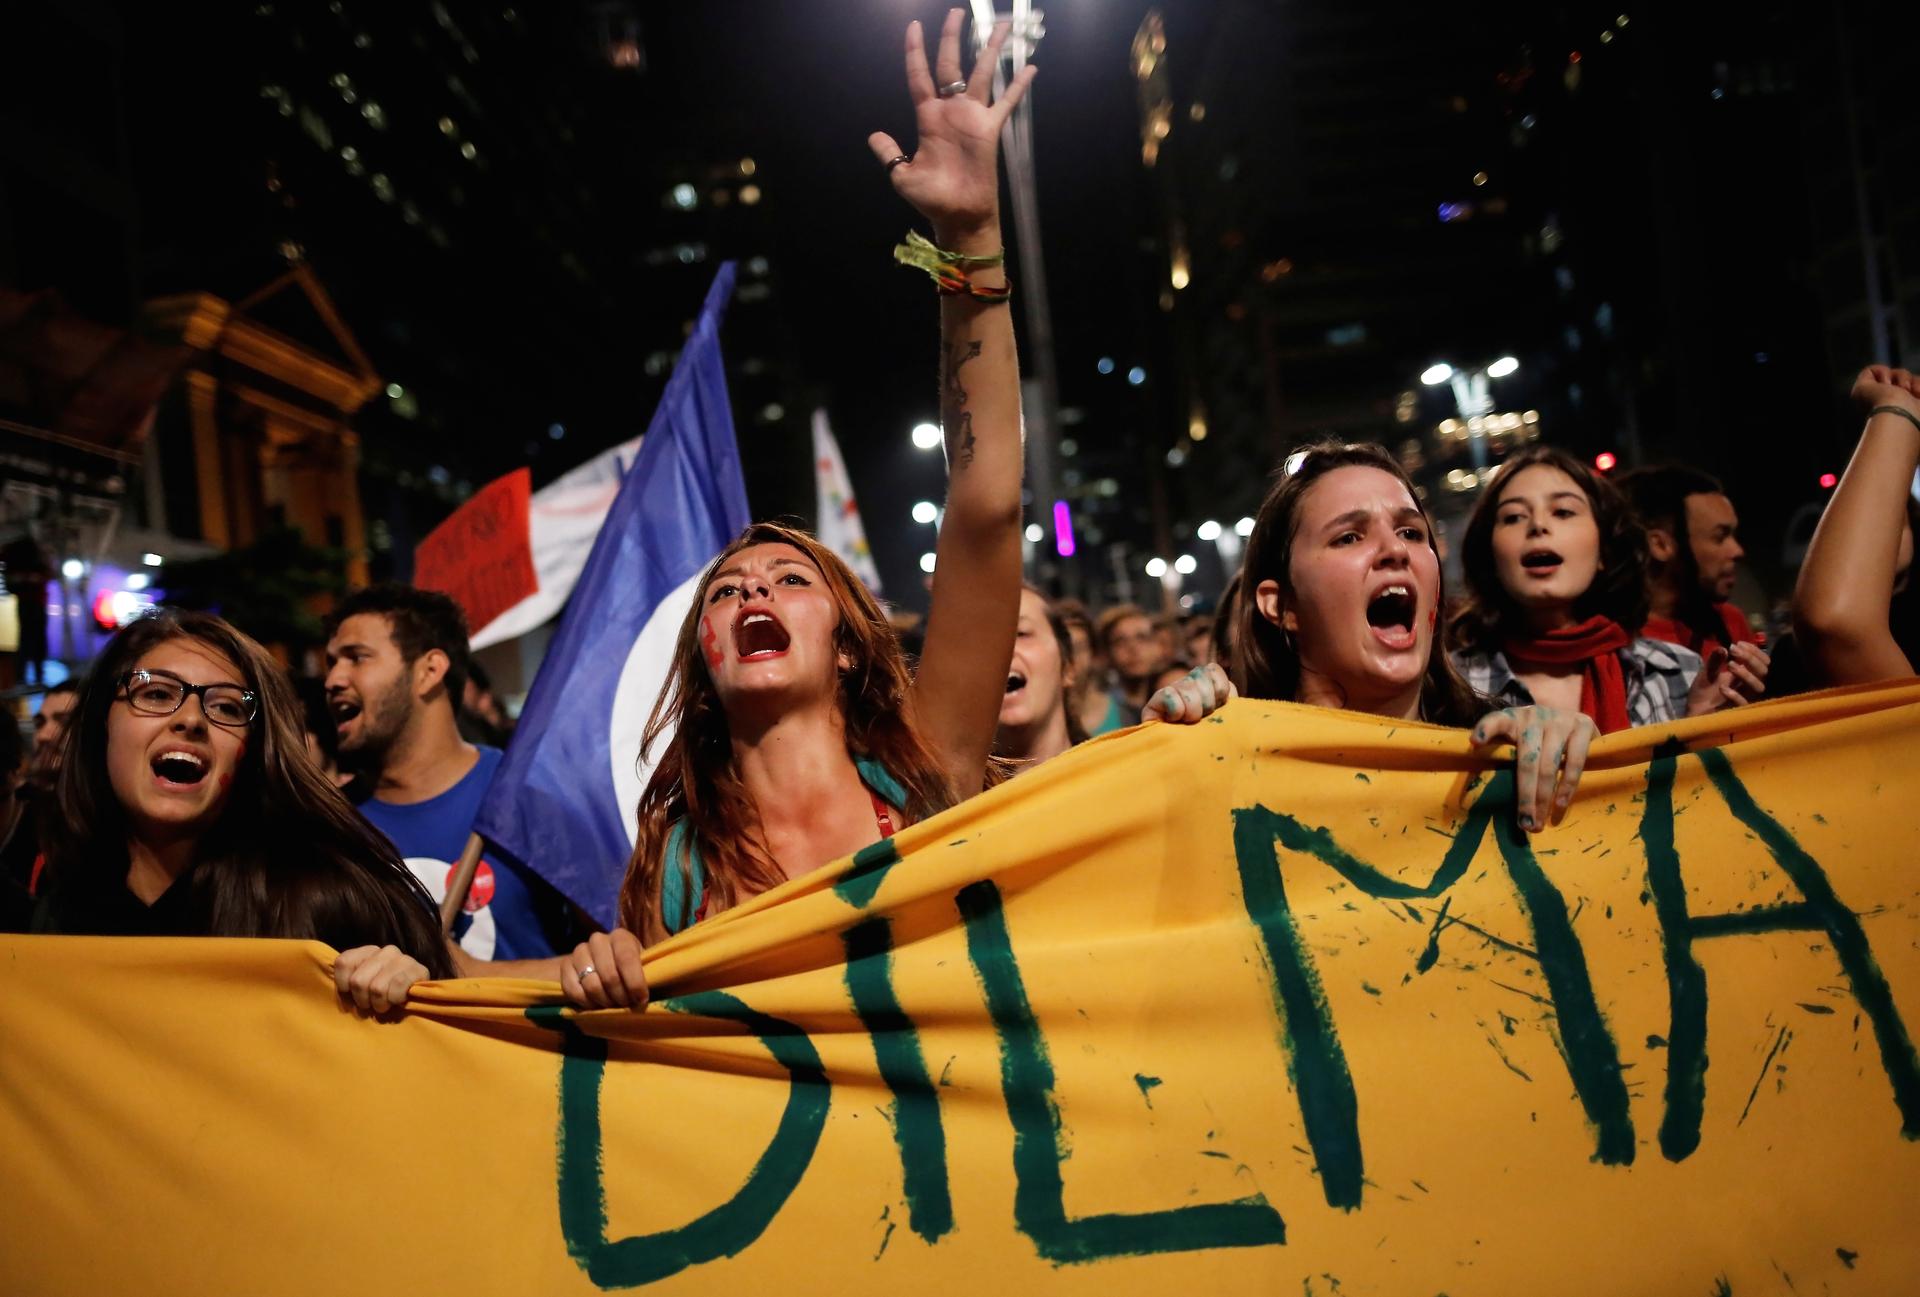 Women shout slogans during a protest against Brazil's interim President Michel Temer and in support of suspended President Dilma Rousseff on Paulista Avenue in Sao Paulo, Brazil, on May 17.